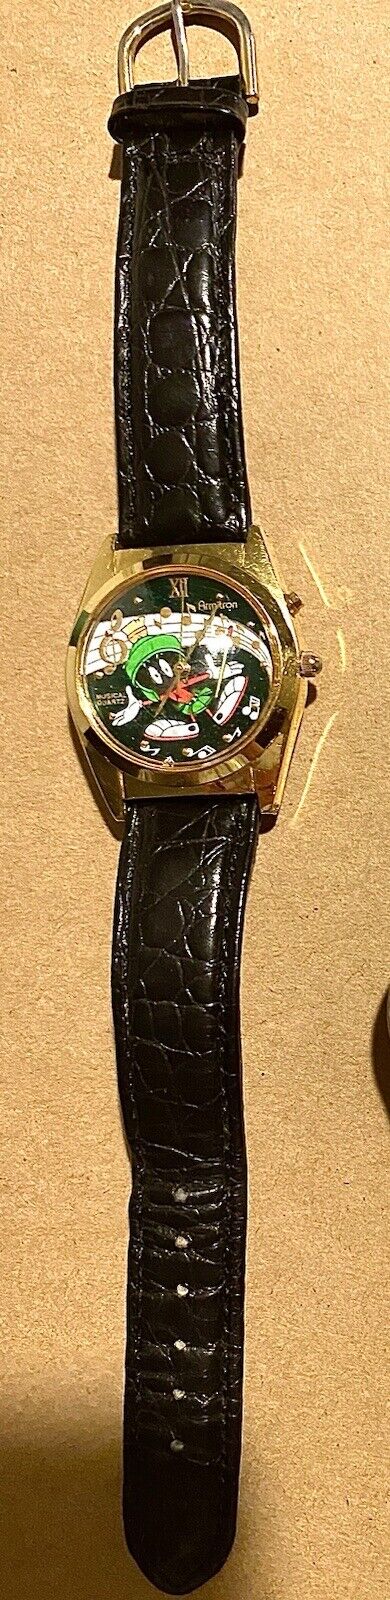 1994 rare Marvin the Martian Looney tunes watch with music 